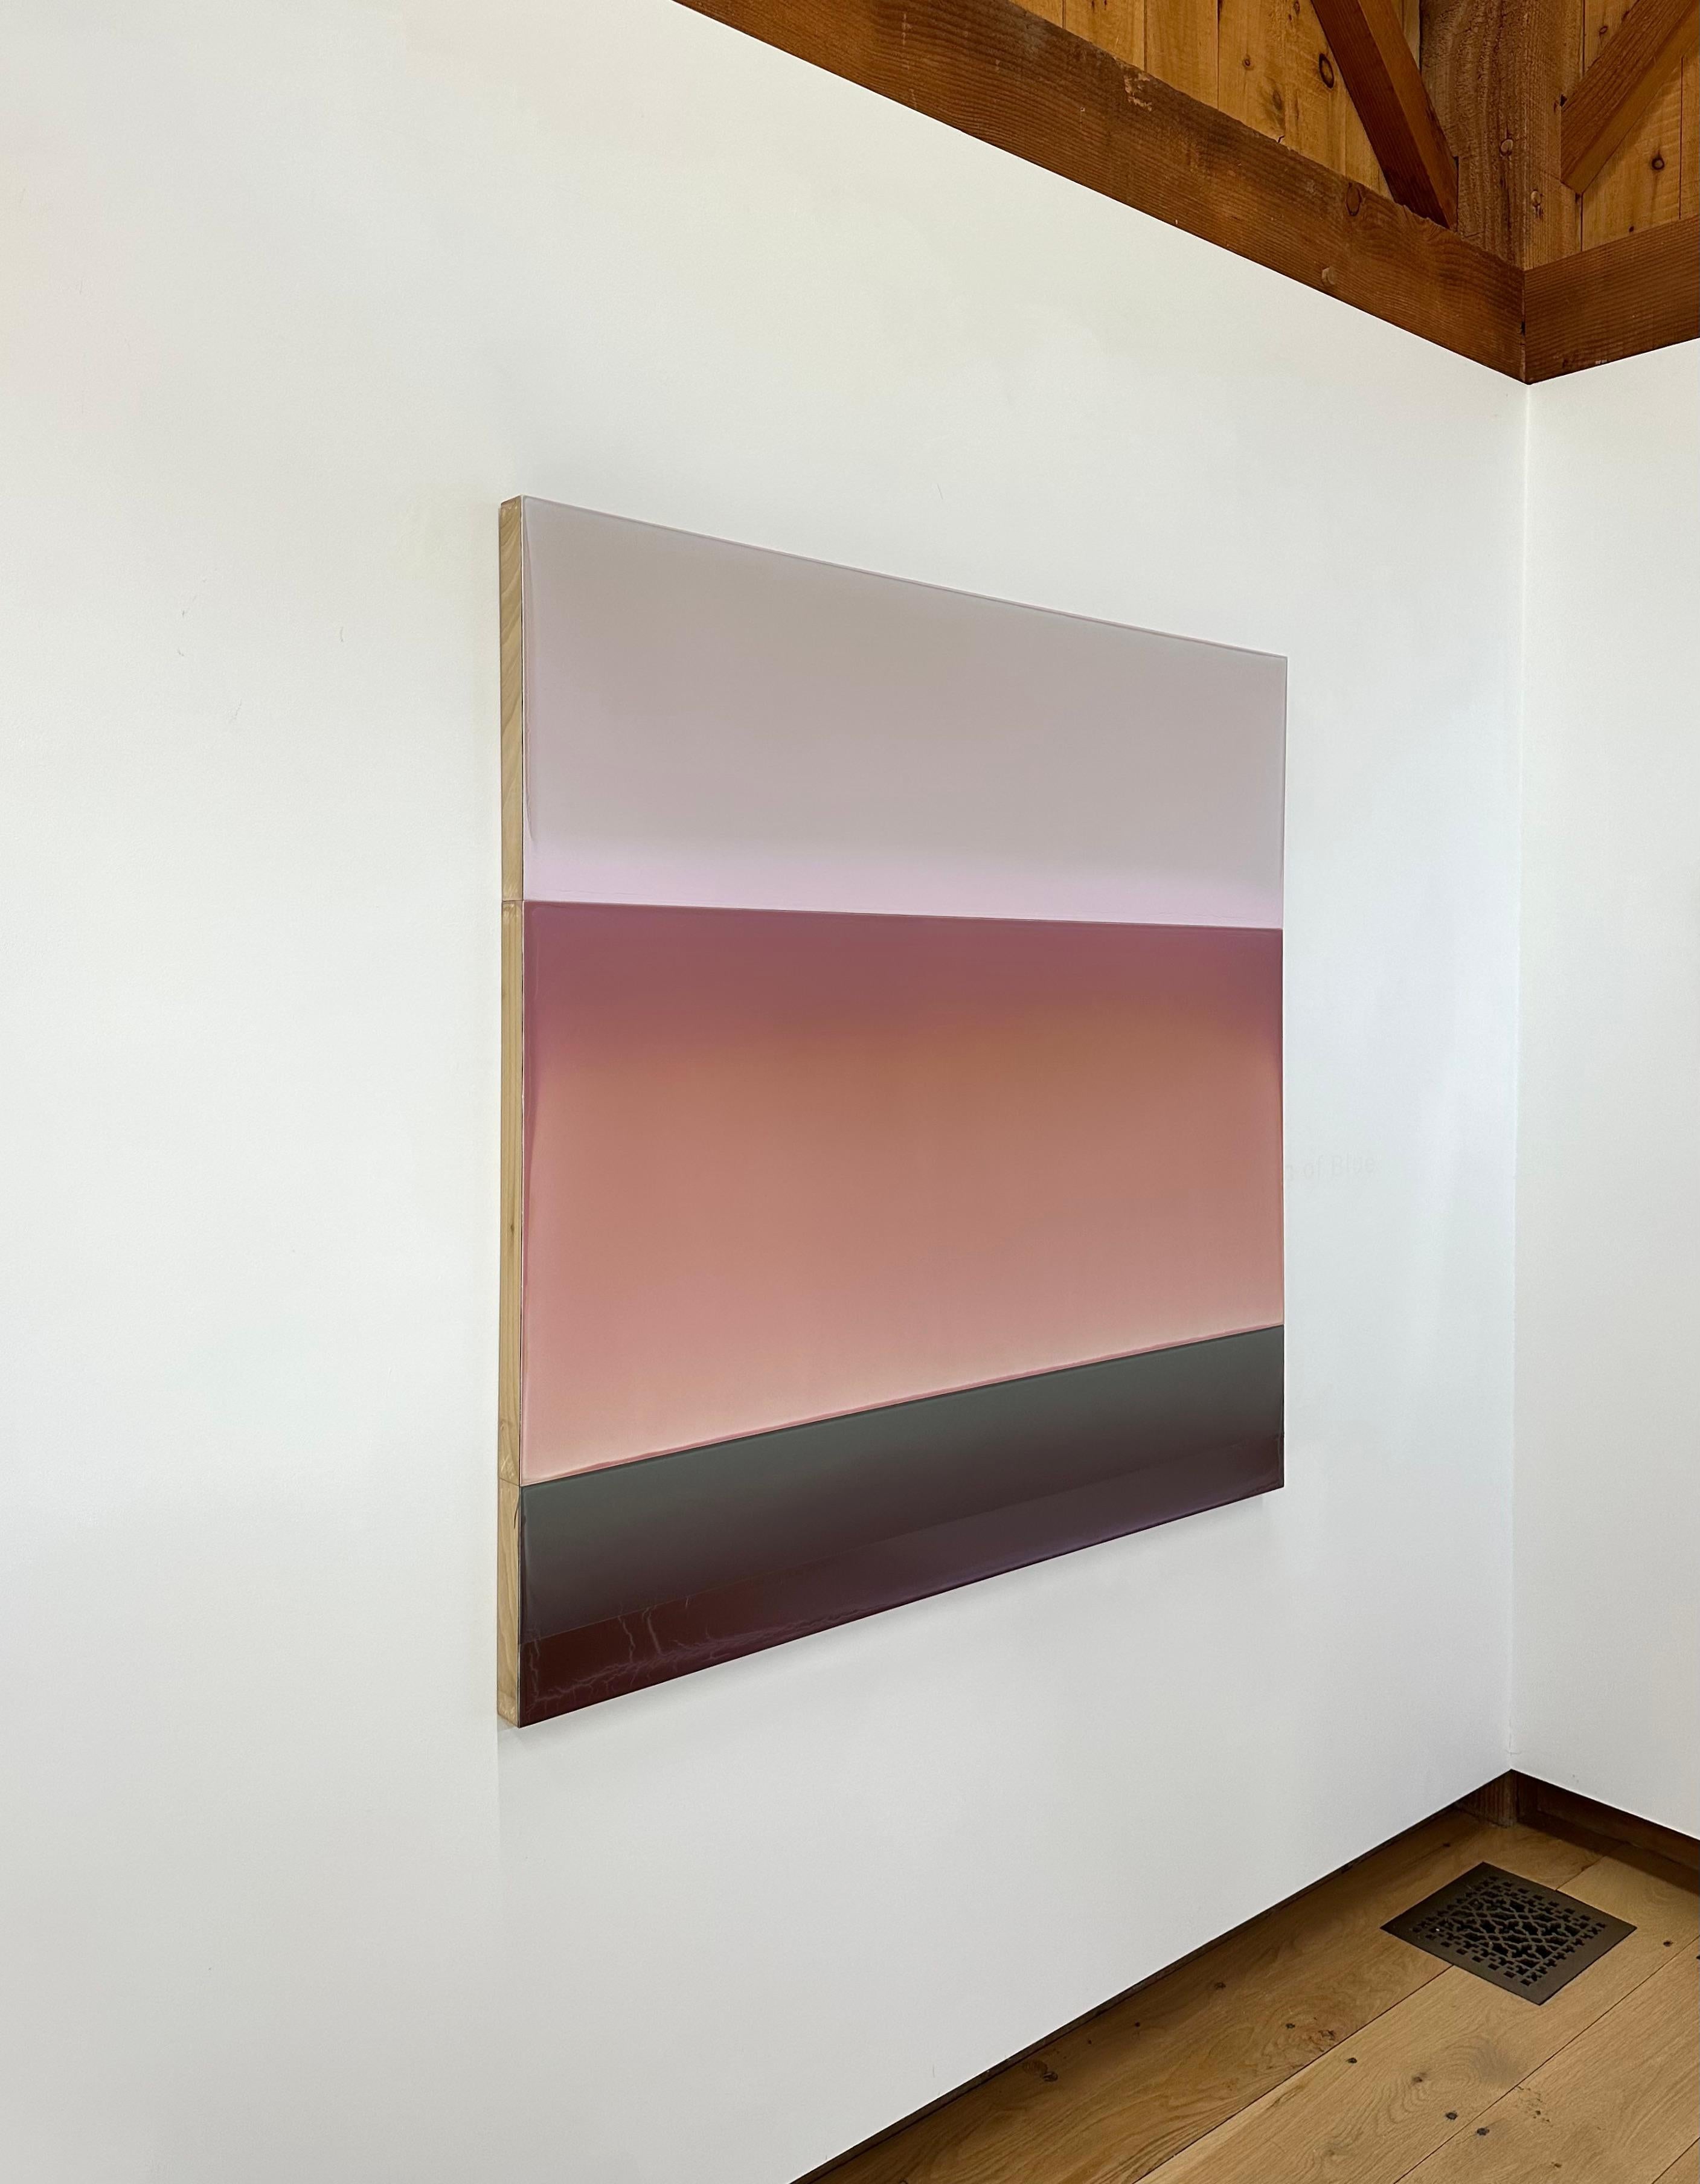 Kermes and Cochineal (FS) by Susan English is a wonderful play of color, light, and composition. The layers of English's tinted polymer on aluminum create the depth and surface textures throughout the painting, which is composed of three panels. The